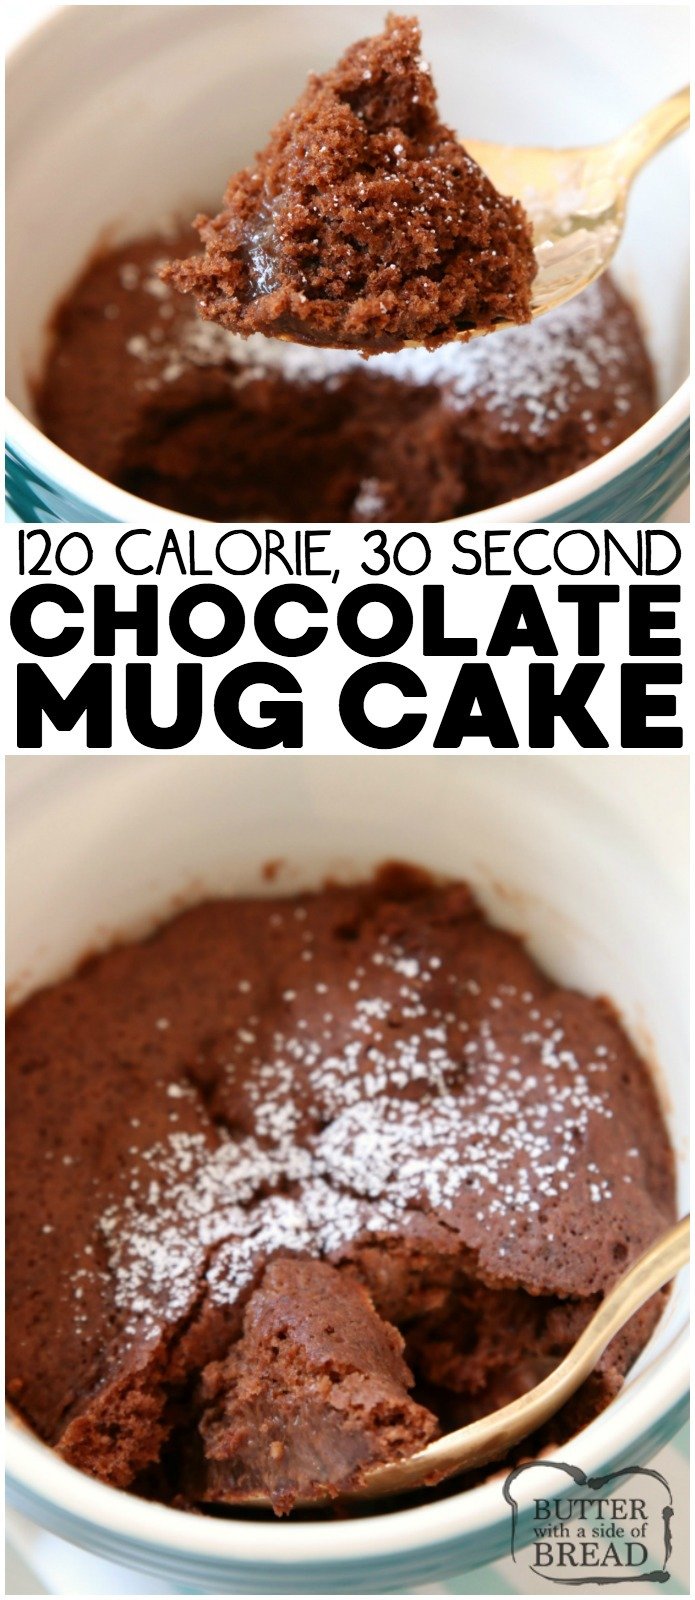 100 Calorie Chocolate Mug Cake Recipe made with common ingredients in 30 seconds! Soft, sweet & fudgy low-cal chocolate mug cake perfect for cravings.  #mugcake #cake #chocolate #lowcal #sweet #lowcalorie #dessert #recipe from BUTTER WITH A SIDE OF BREAD